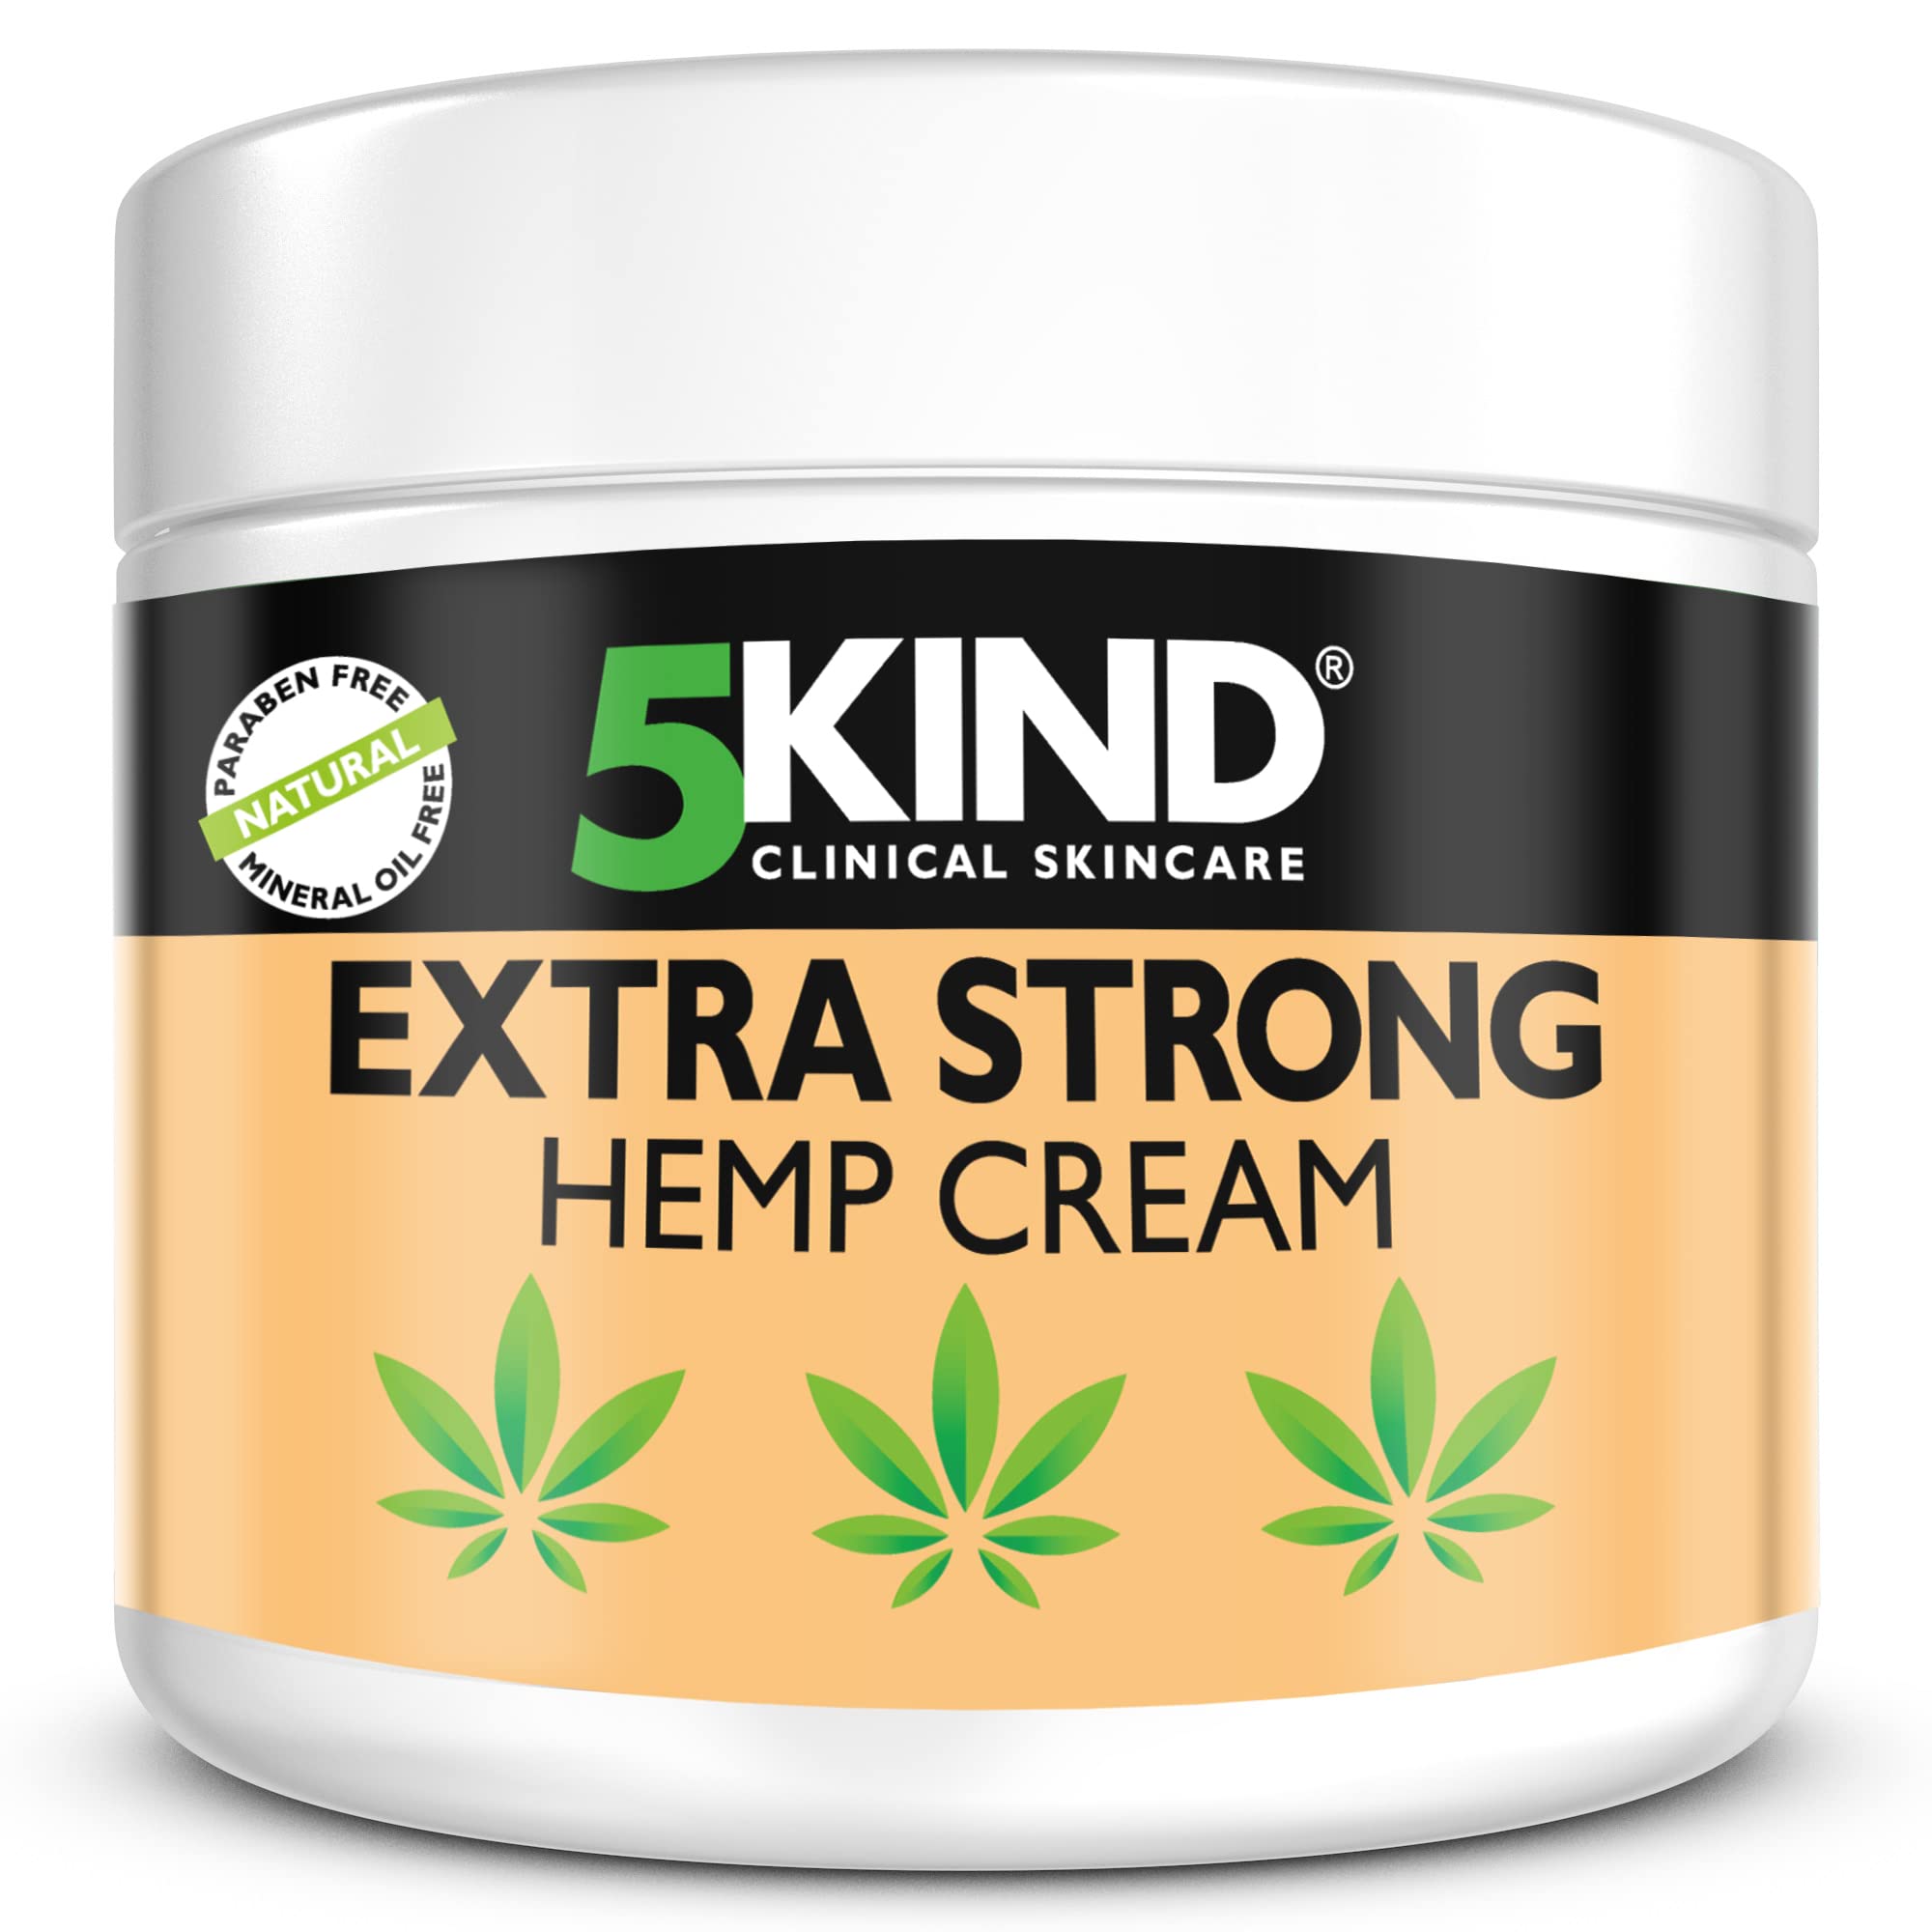 Extra Strong Hemp Joint & Muscle Active Relief Cream- High Strength Hemp Oil Formula Rich in Natural Extracts by 5kind. Soothe Feet, Knees, Back, Shoulders and Help to Ease Tension and Stress